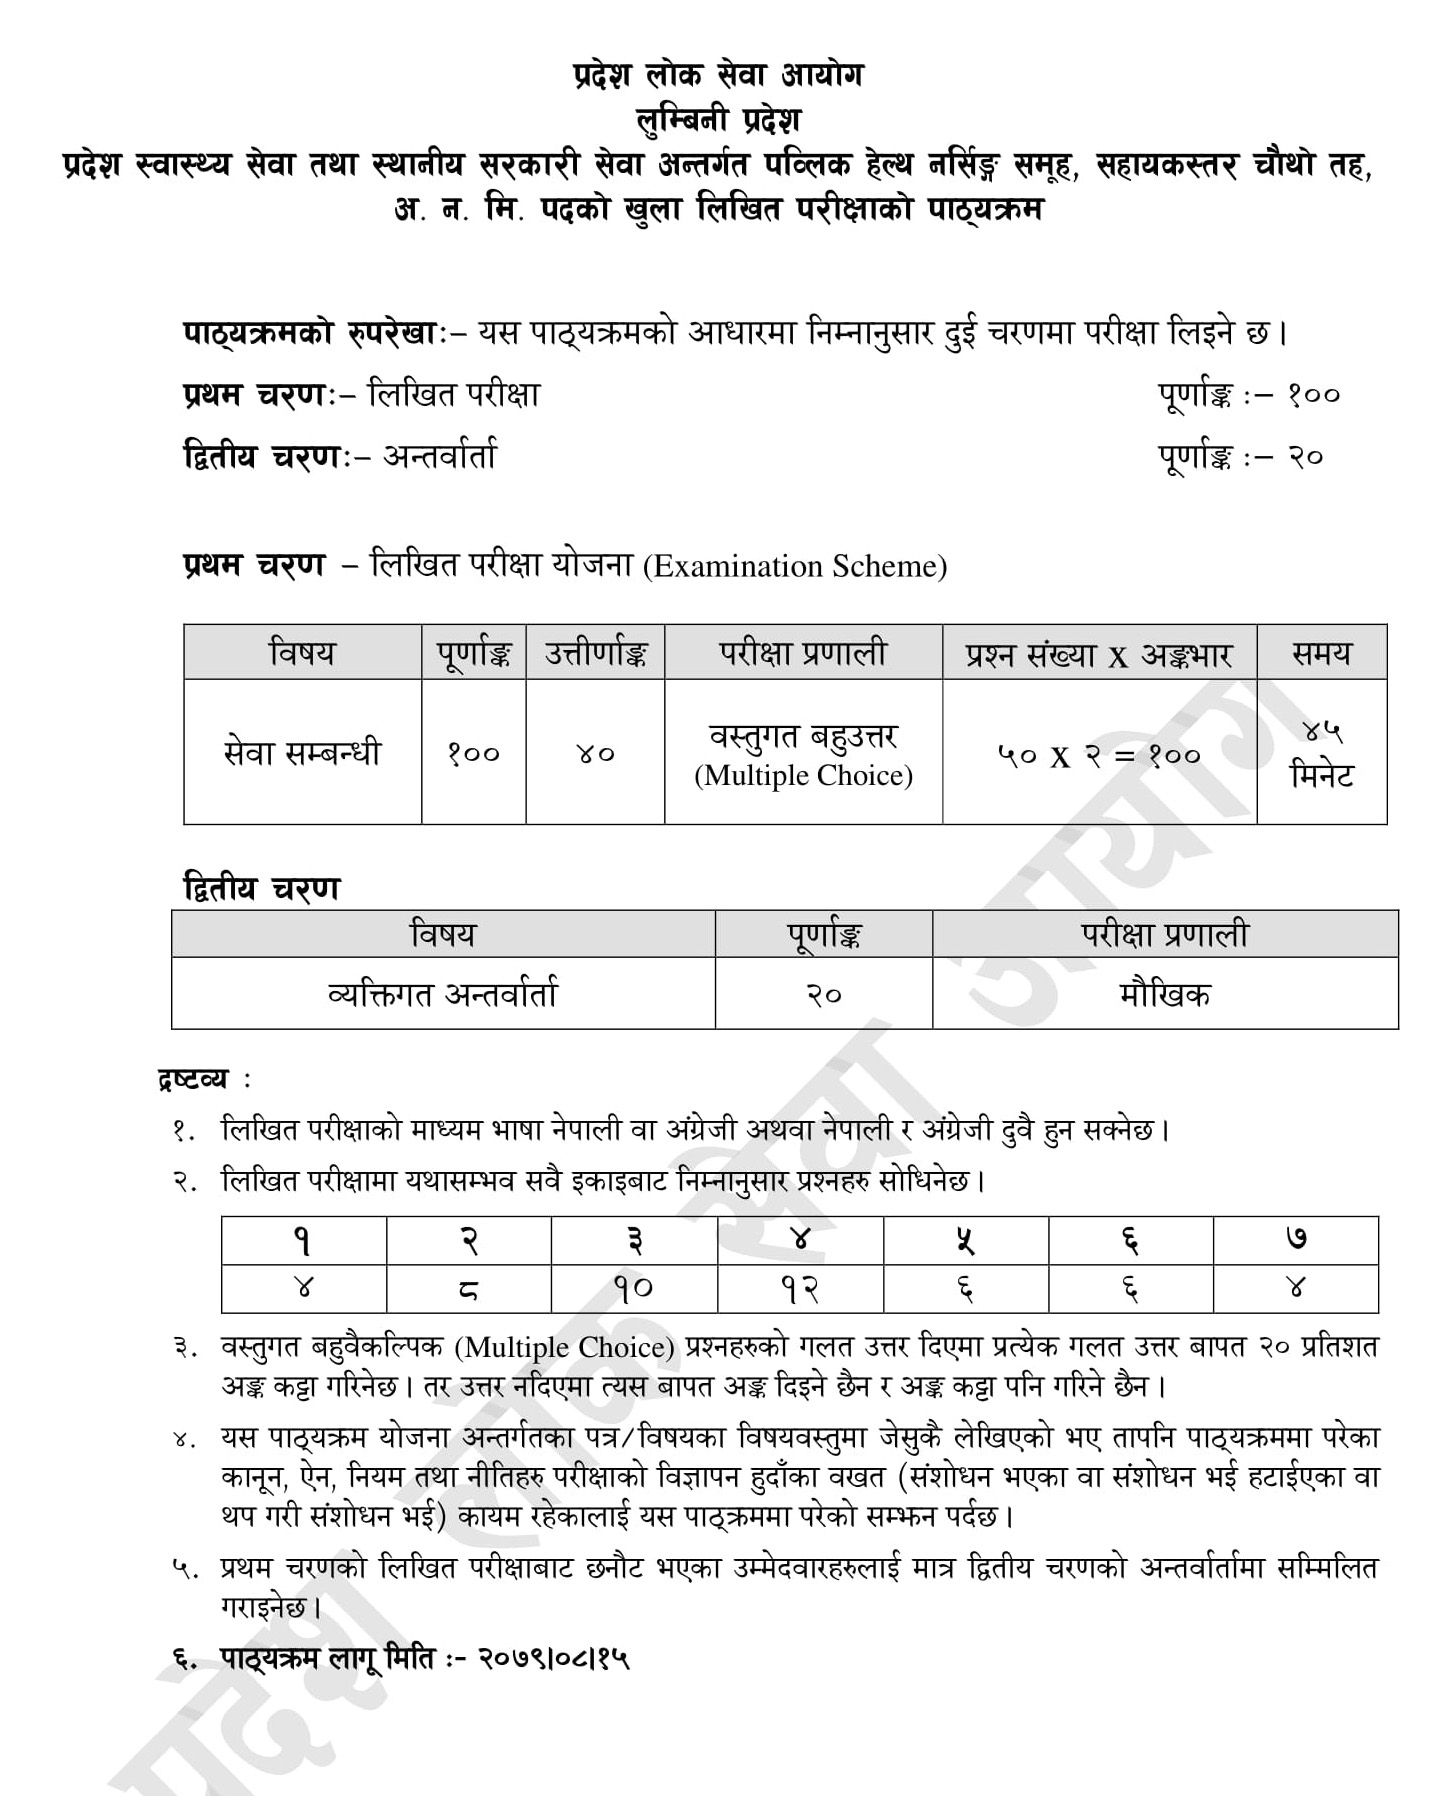 Lok Sewa Aayog (Public Service Commission) Lumbini Pradesh has released has released ANM for Assistant 4th level of new syllabus.